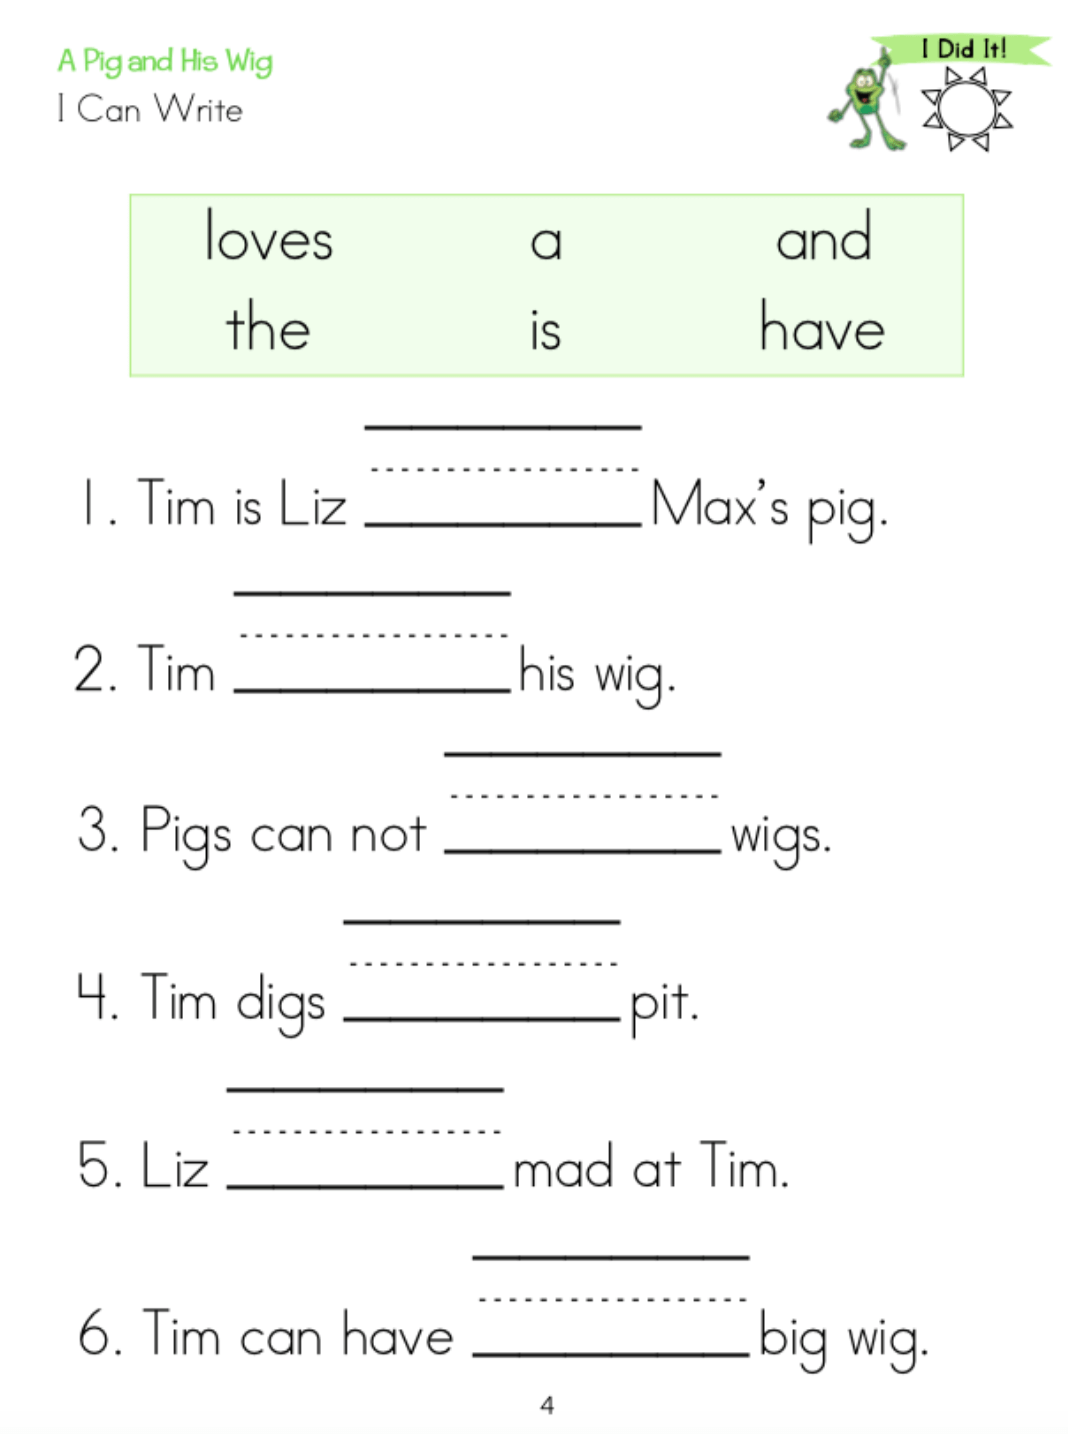 Whole Phonics A Pig and His Wig I can write image